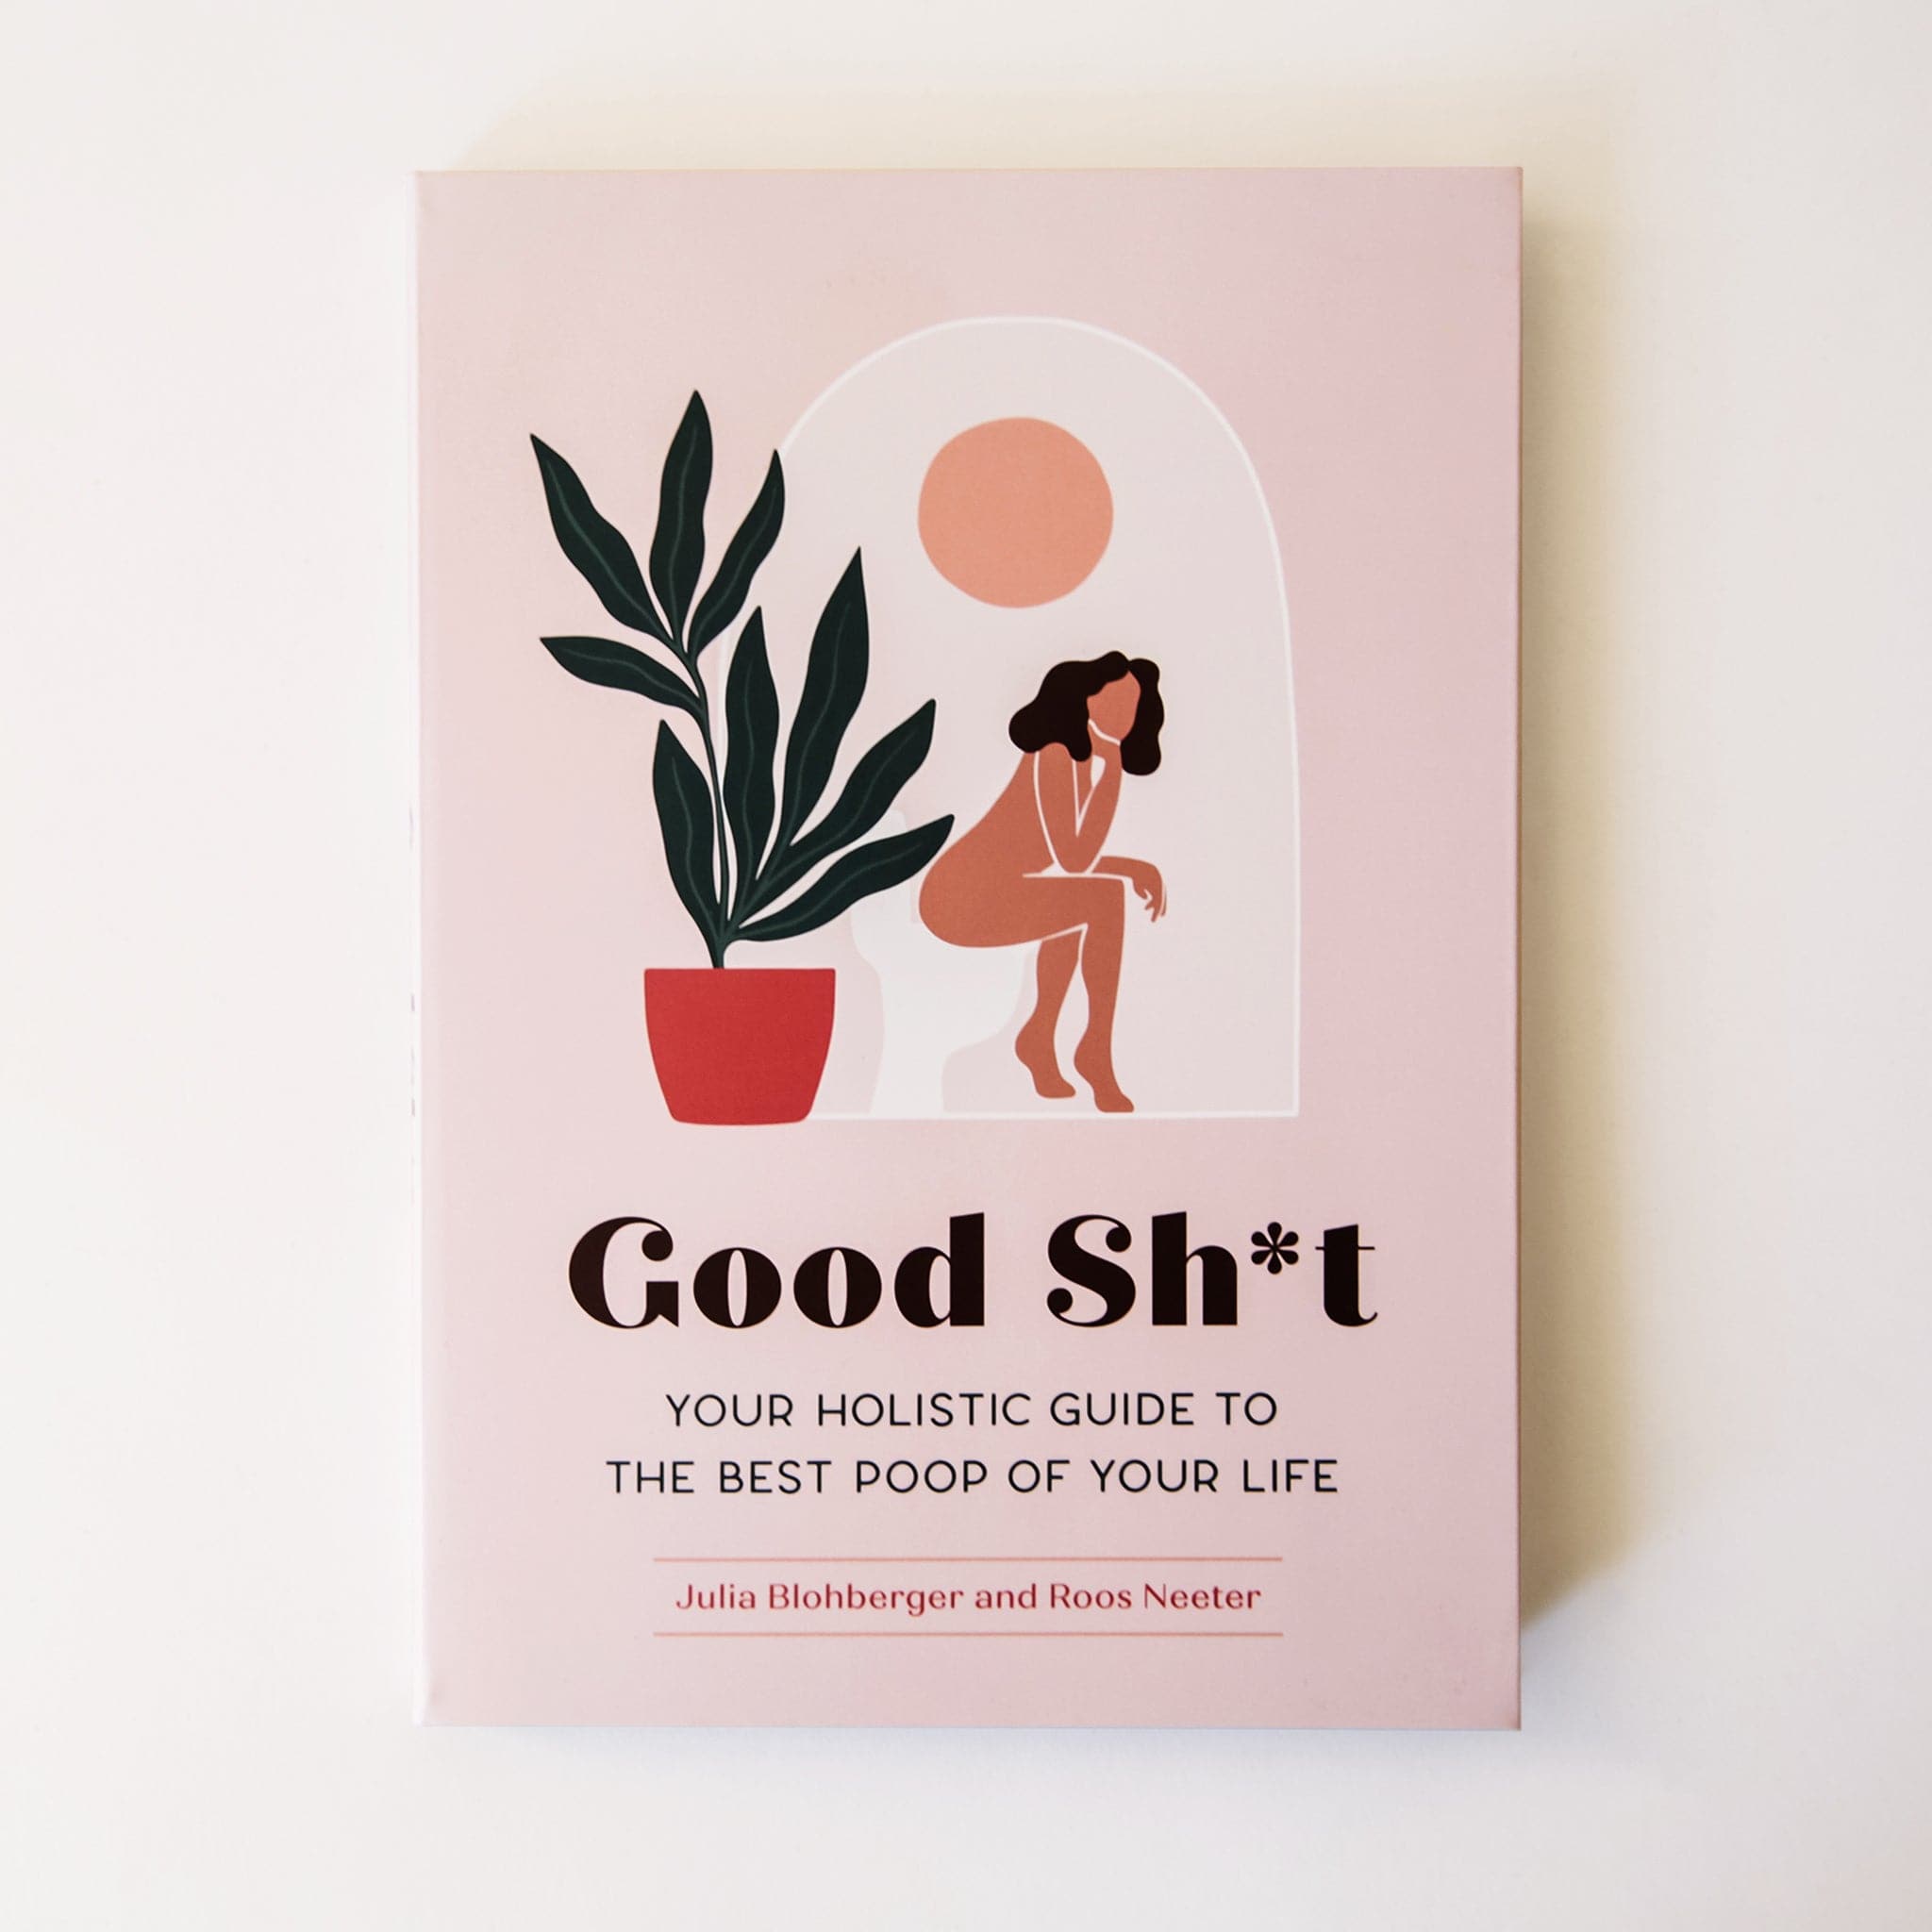 On a cream background is a light pink book with an illustration of someone sitting on a toilet with a plant next to them and the title in black text that reads, "Good Sh*t Your Guide To The Best Poop Of Your Life".